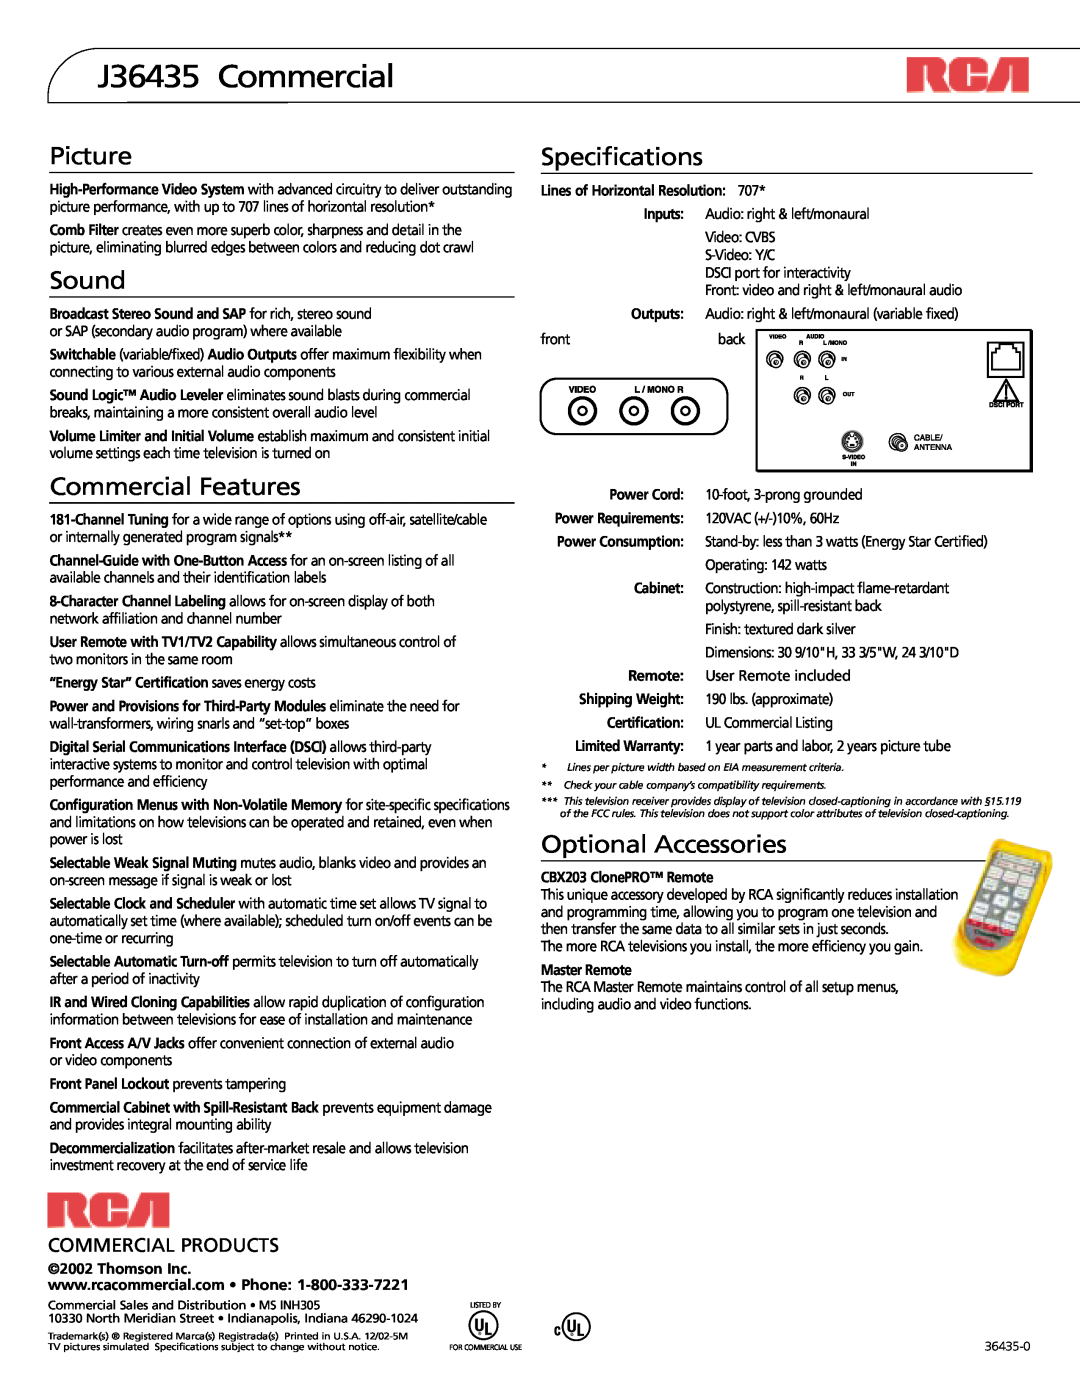 RCA J36435 Commercial, Picture, Sound, Commercial Features, Specifications, Optional Accessories, Commercial Products 